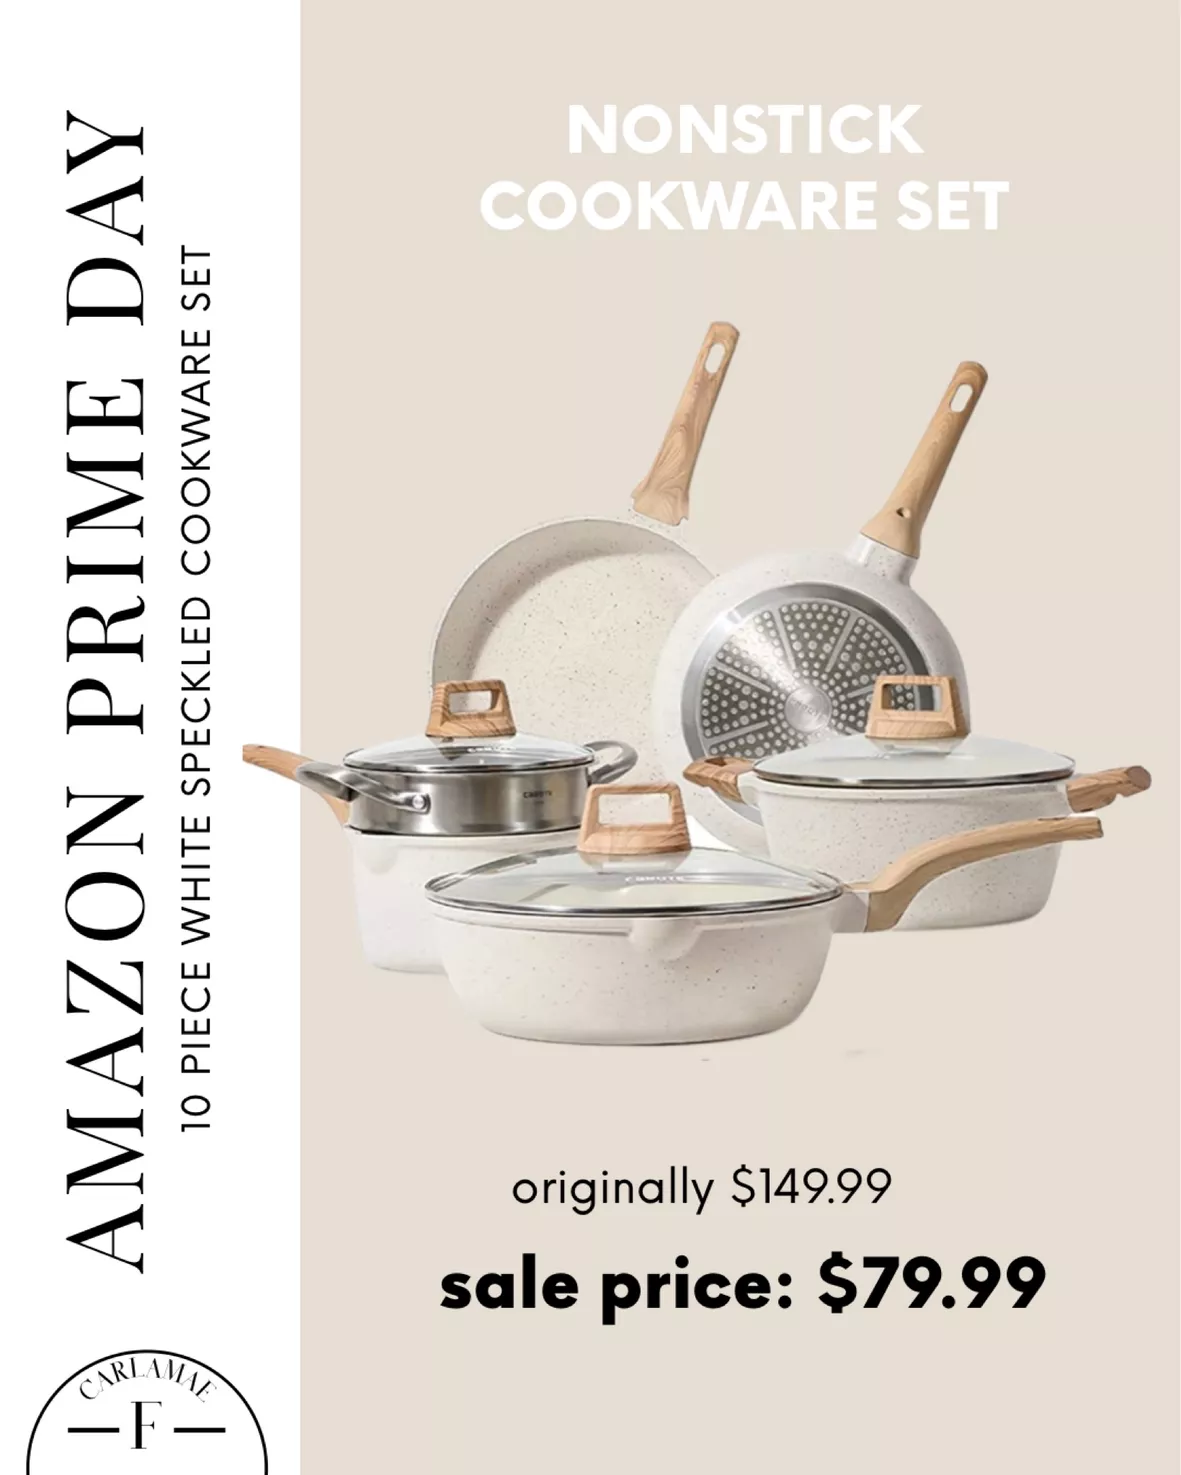 Carote Nonstick Granite Cookware Sets, 10 Pcs Brown Granite Pots and Pans  Set, Induction Stone Kitchen Cooking Set - Coupon Codes, Promo Codes, Daily  Deals, Save Money Today